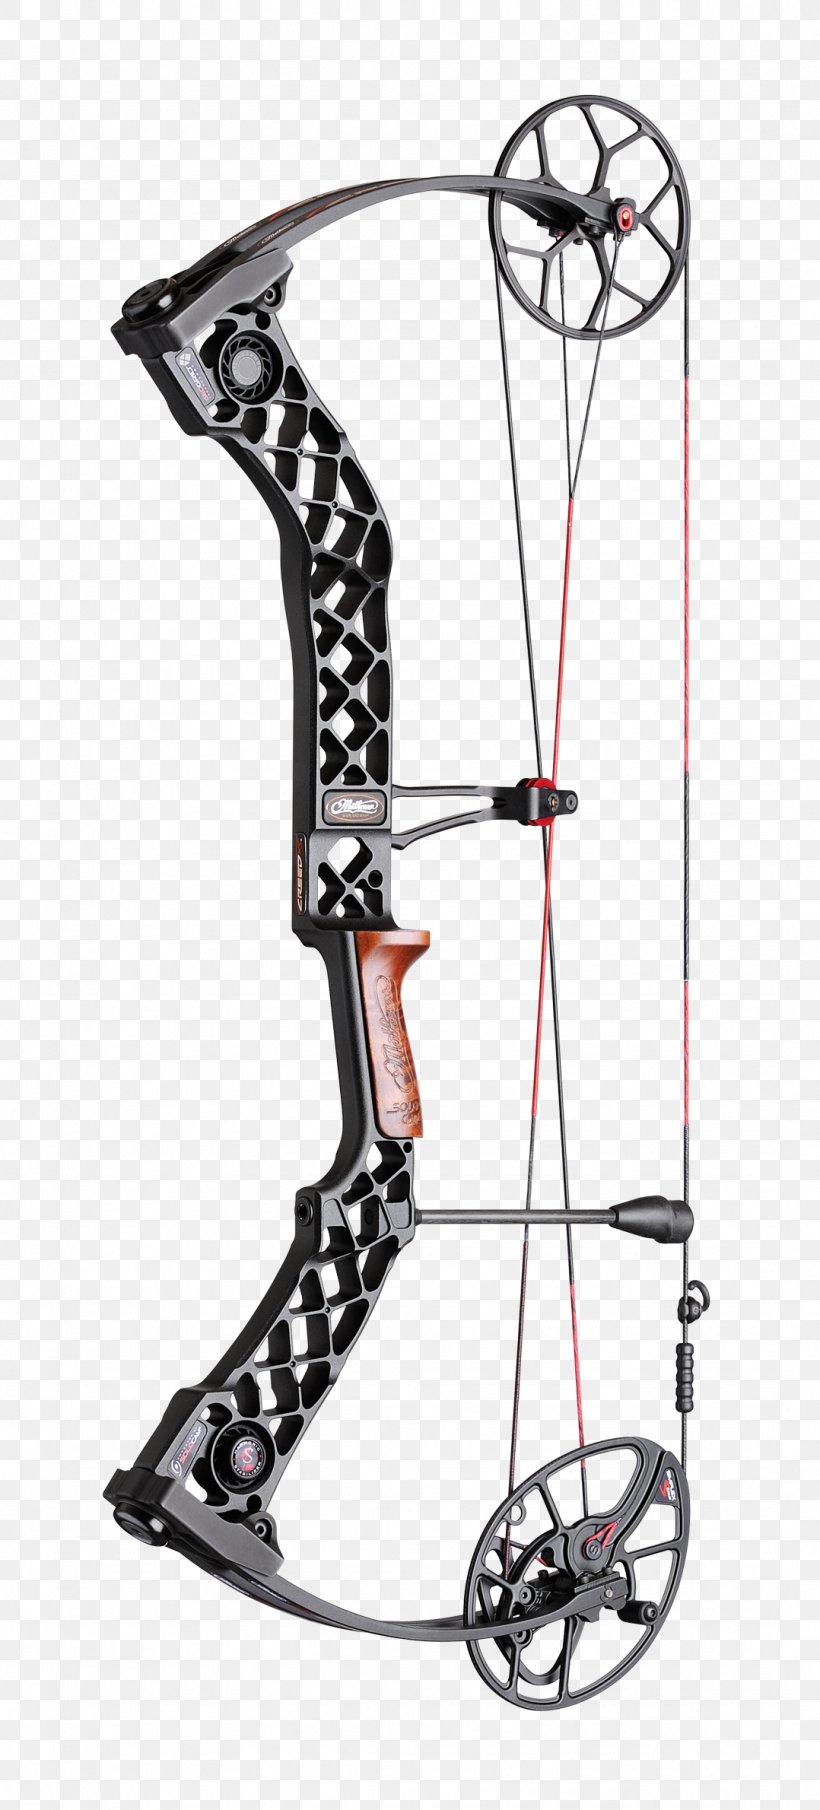 Compound Bows Bowhunting Bow And Arrow Archery, PNG, 1078x2380px, Compound Bows, Archery, Bow, Bow And Arrow, Bowhunting Download Free